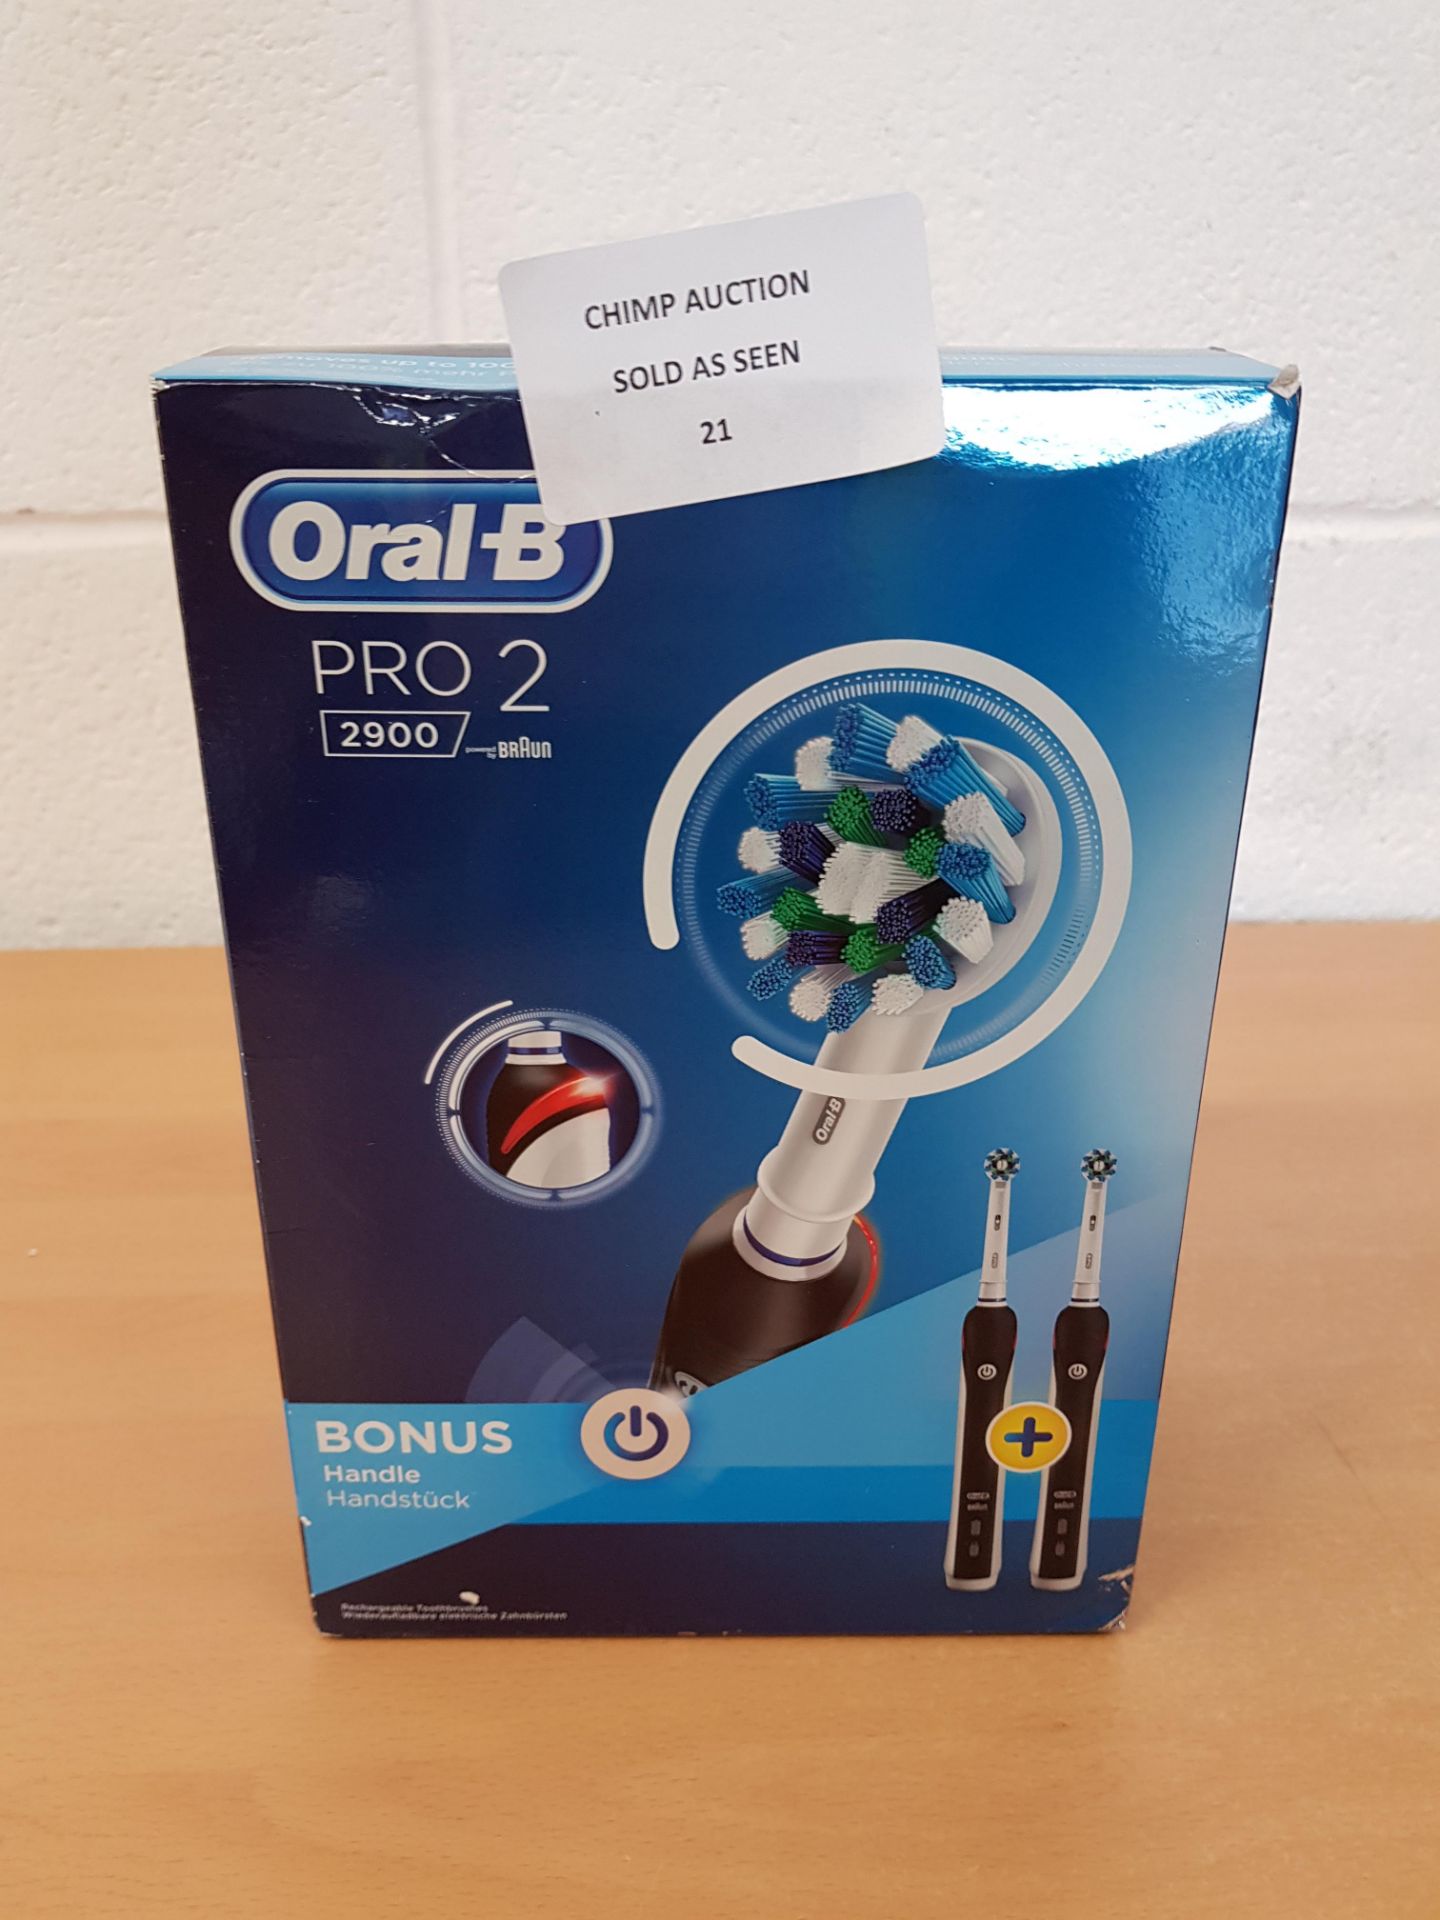 Oral-B Pro 2 2900 TWIN edition electric toothbrush